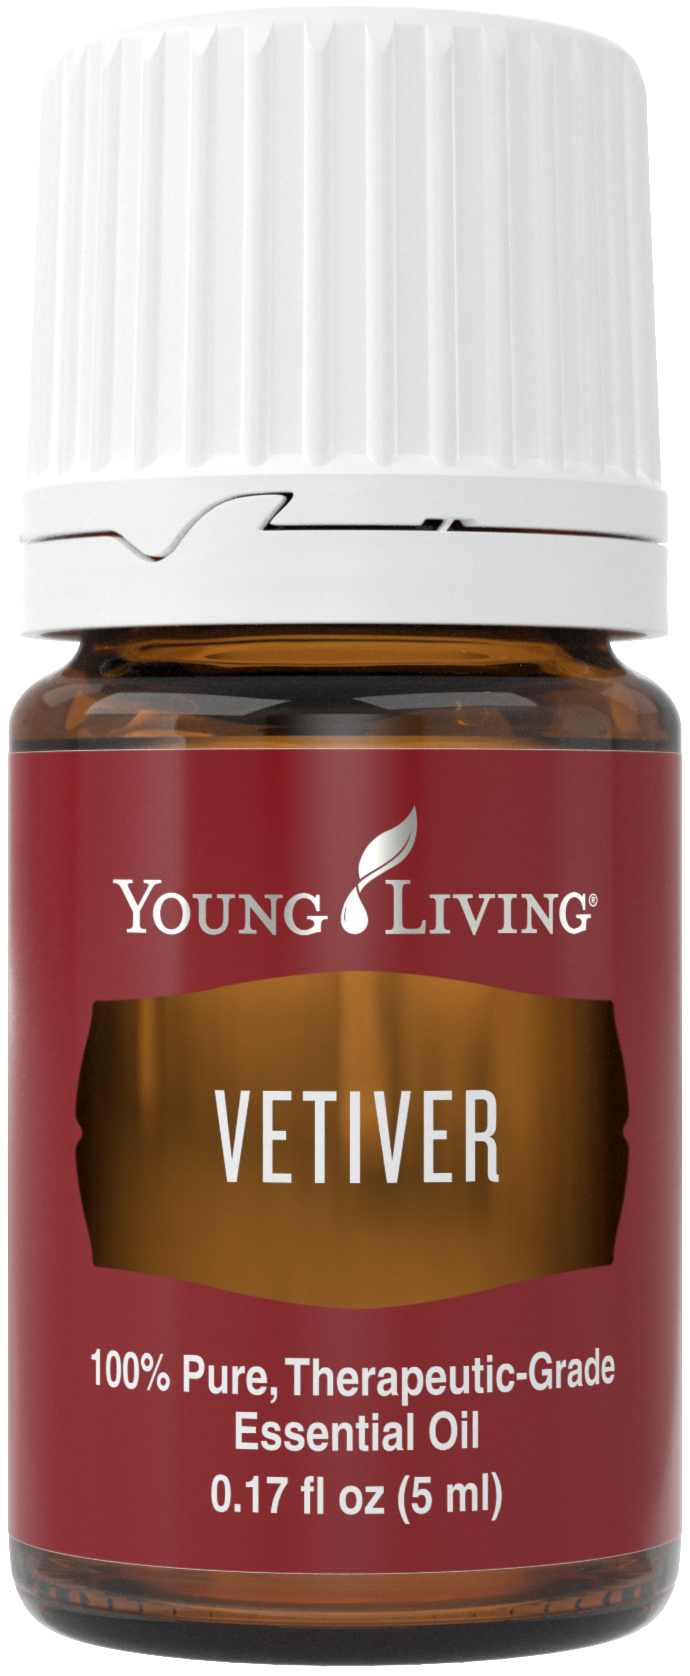 Vetiver 5ml Silo.png